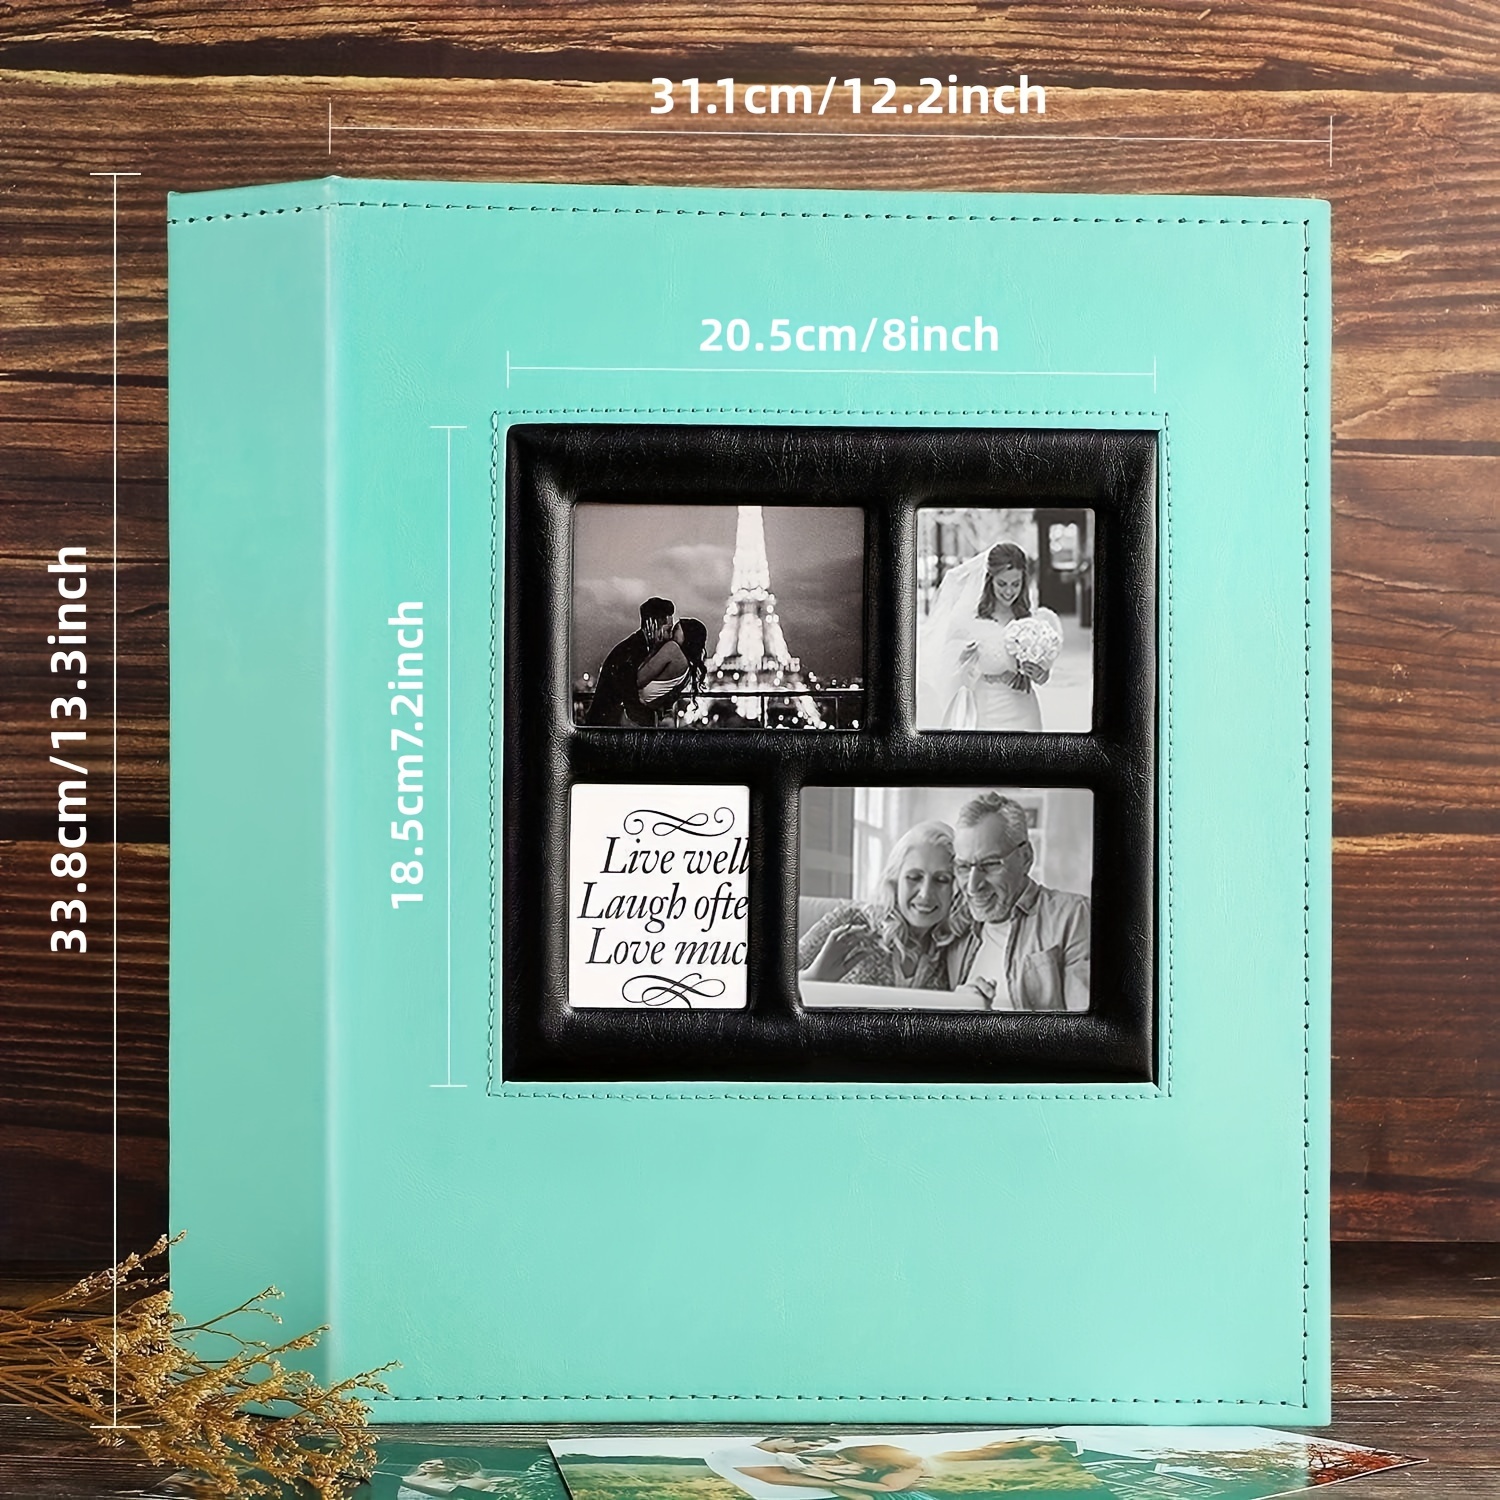 Large Photo Album for 1000 Photos, 4x6 Photo Albums with Pockets, 14 x 13 x  3 In